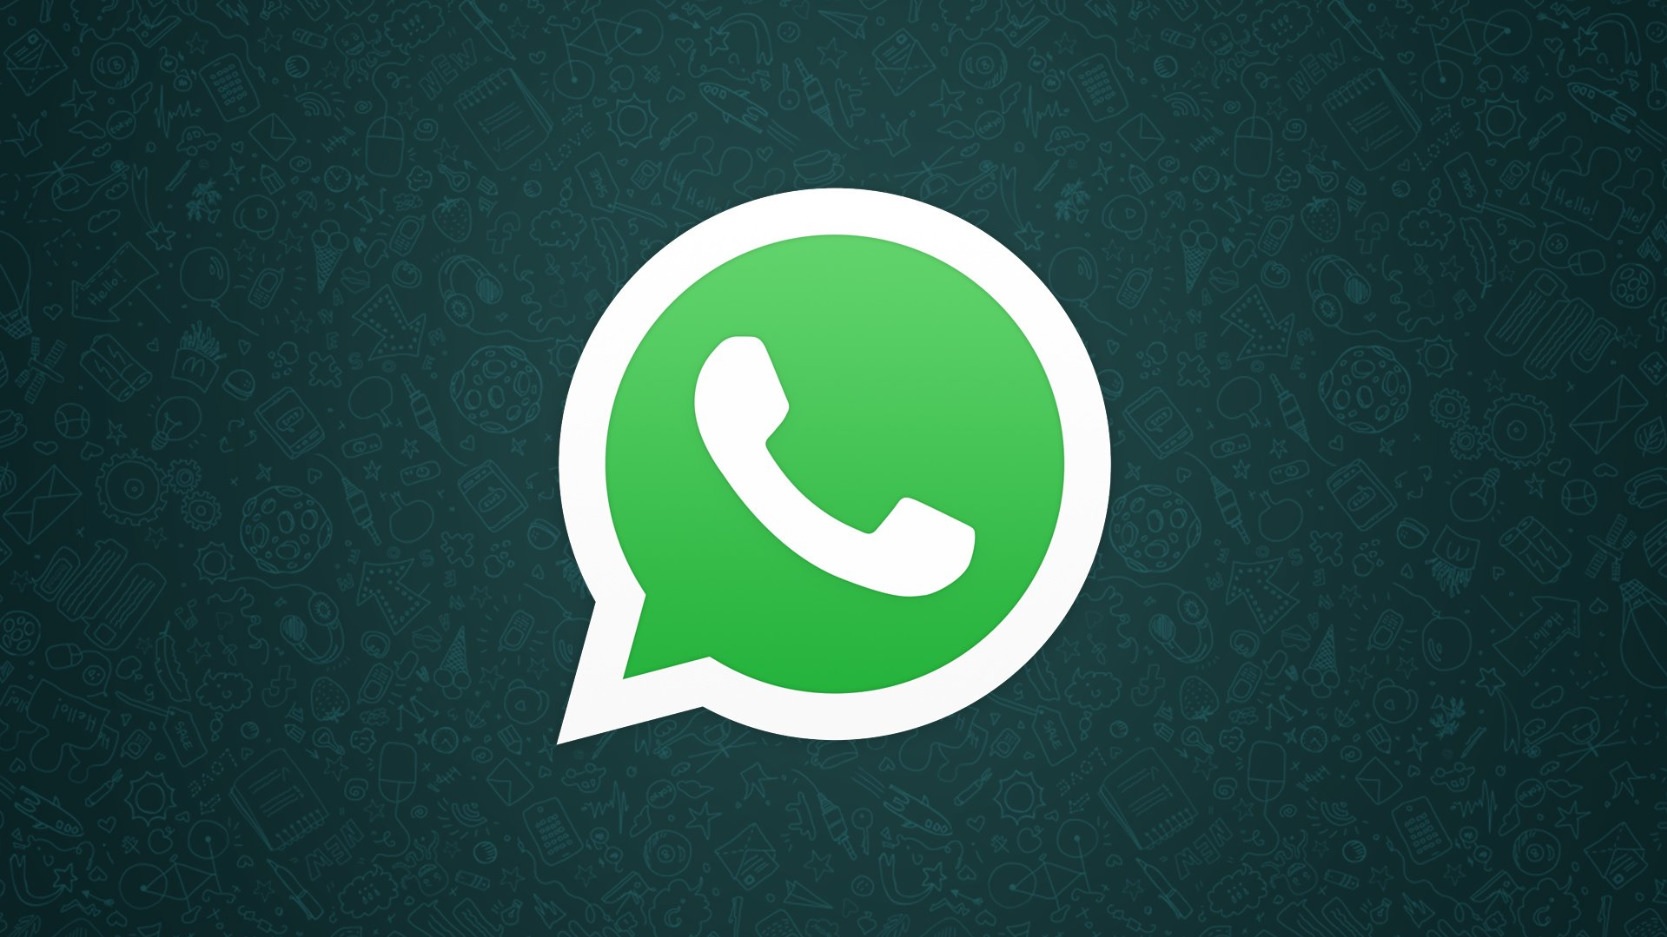 Download The Latest Whatsapp Apk 2 20 196 15 And 2 20 196 12 Beta